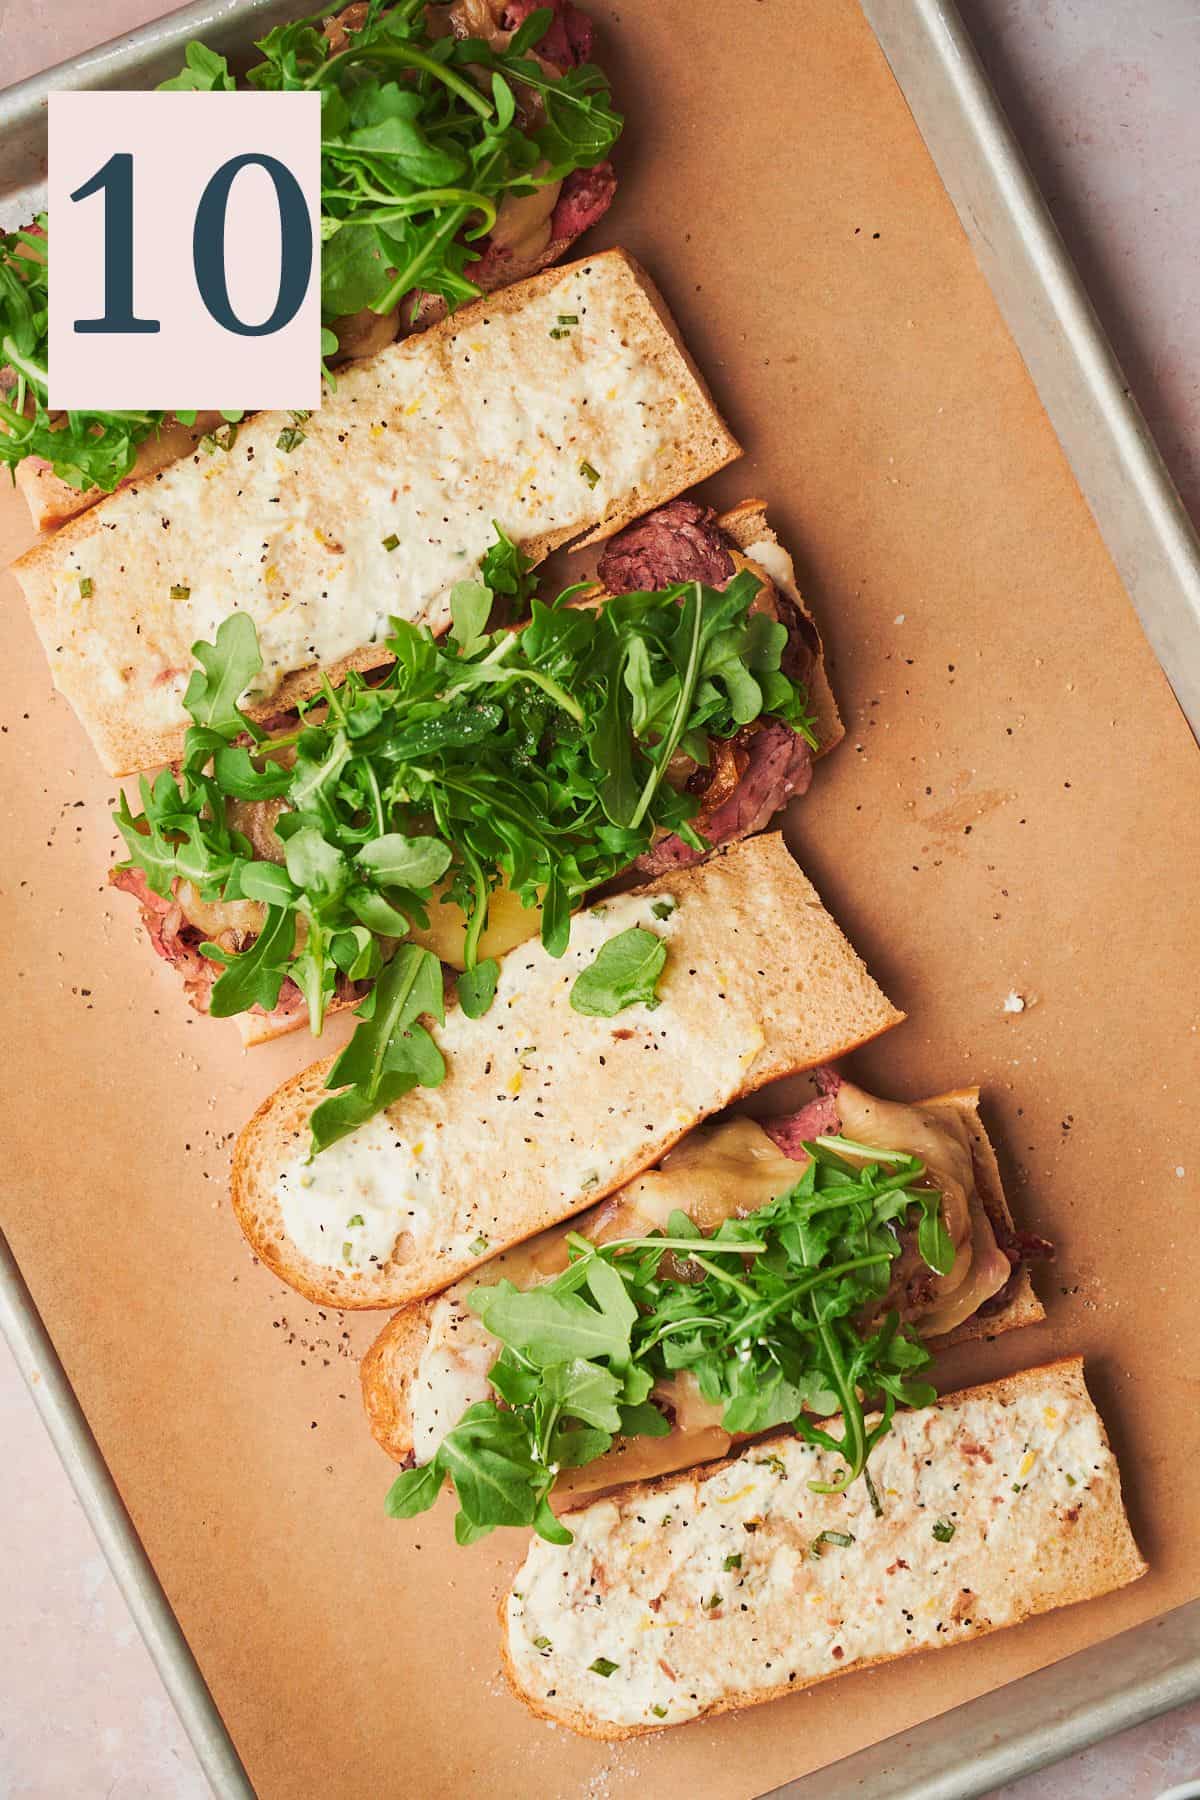 baguettes full of roast beef, cheese, and arugula open and facing the camera on a baking sheet. 